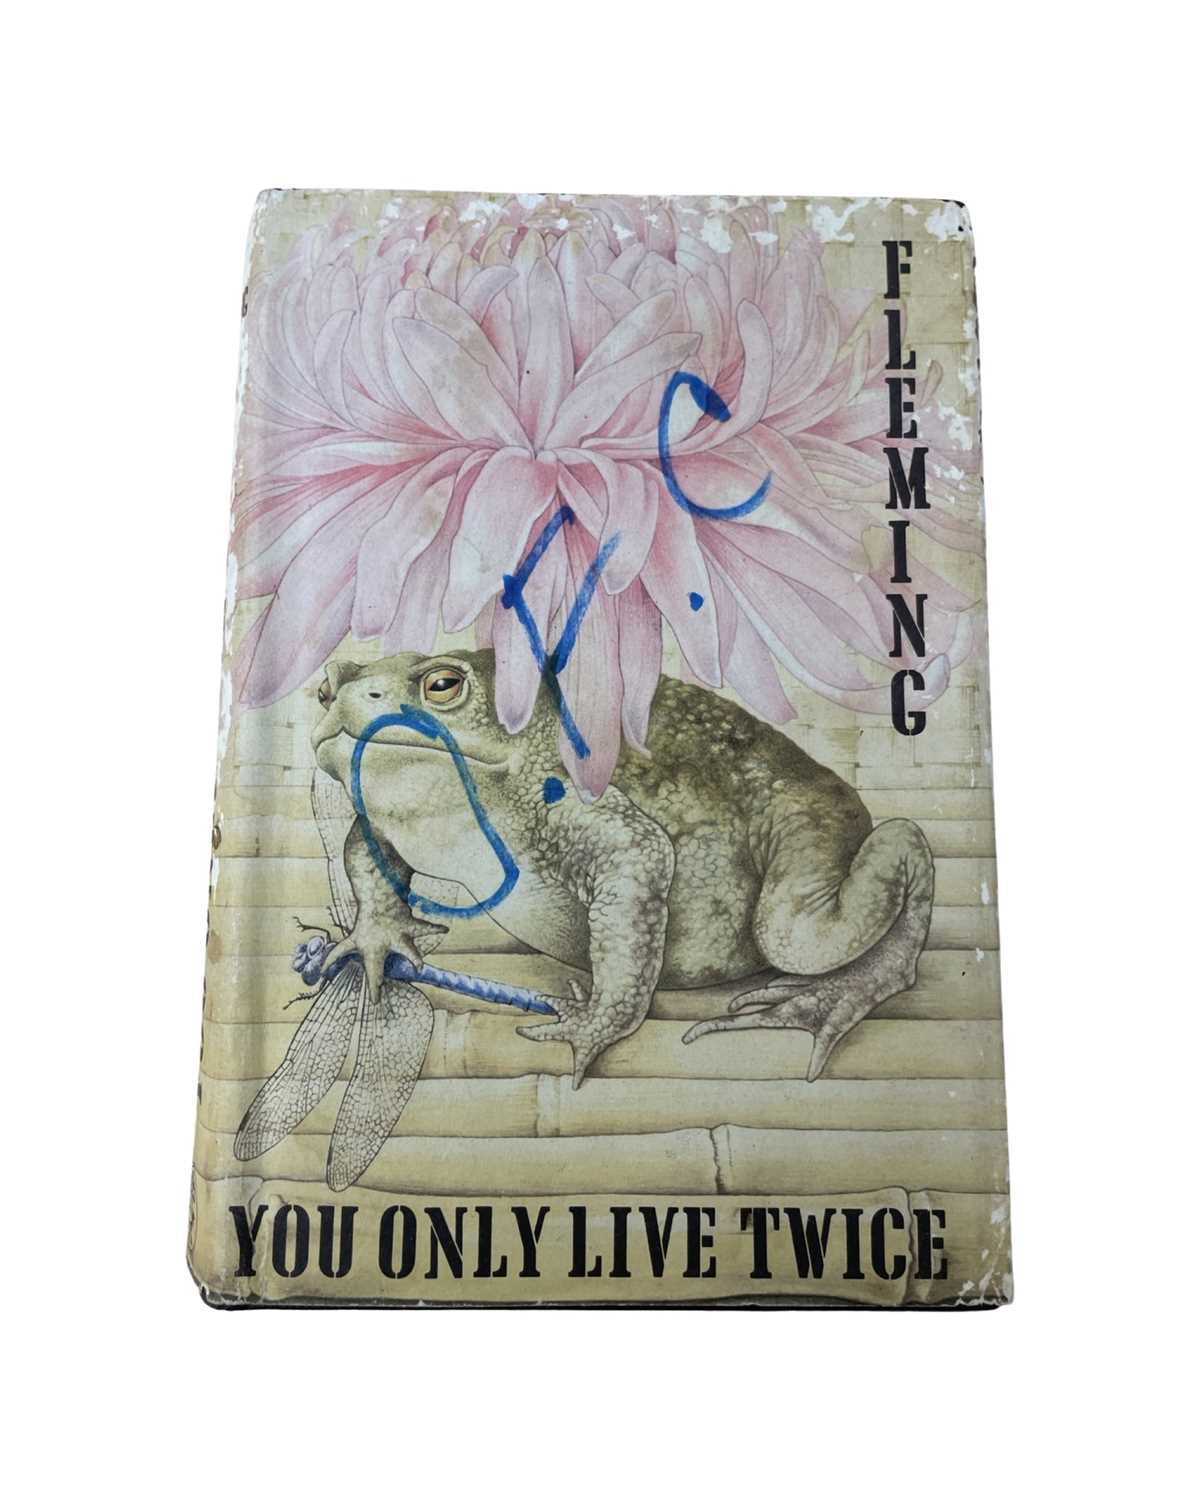 A first edition copy of James Bond: You Only Live Twice, IAN FLEMING. Jonathan Cape: 1964 Original